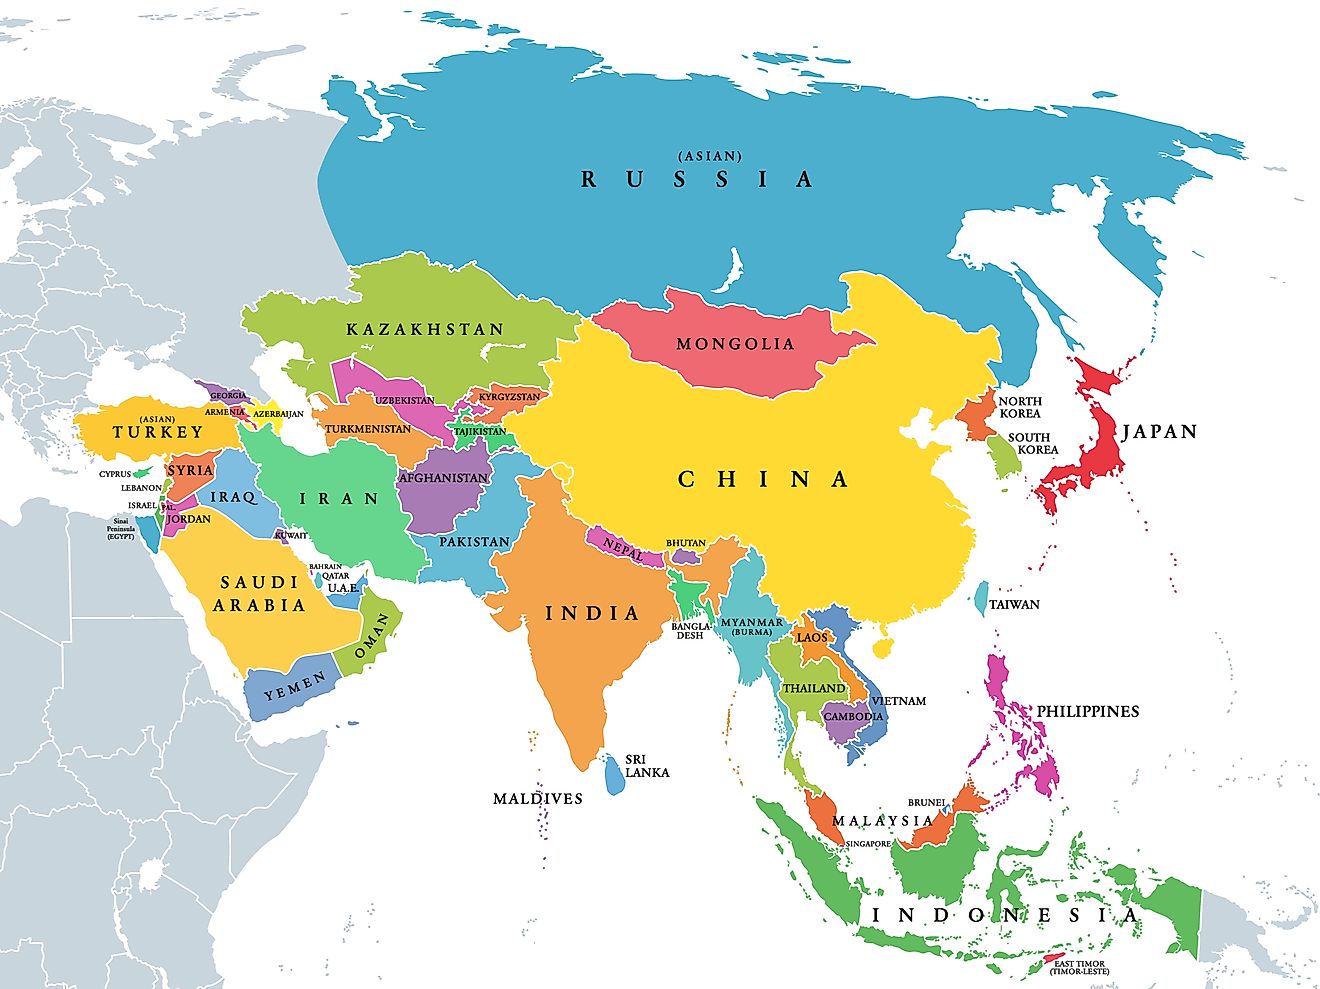 Political Map Of Asia 2020 What Are The Five Regions Of Asia? - Worldatlas